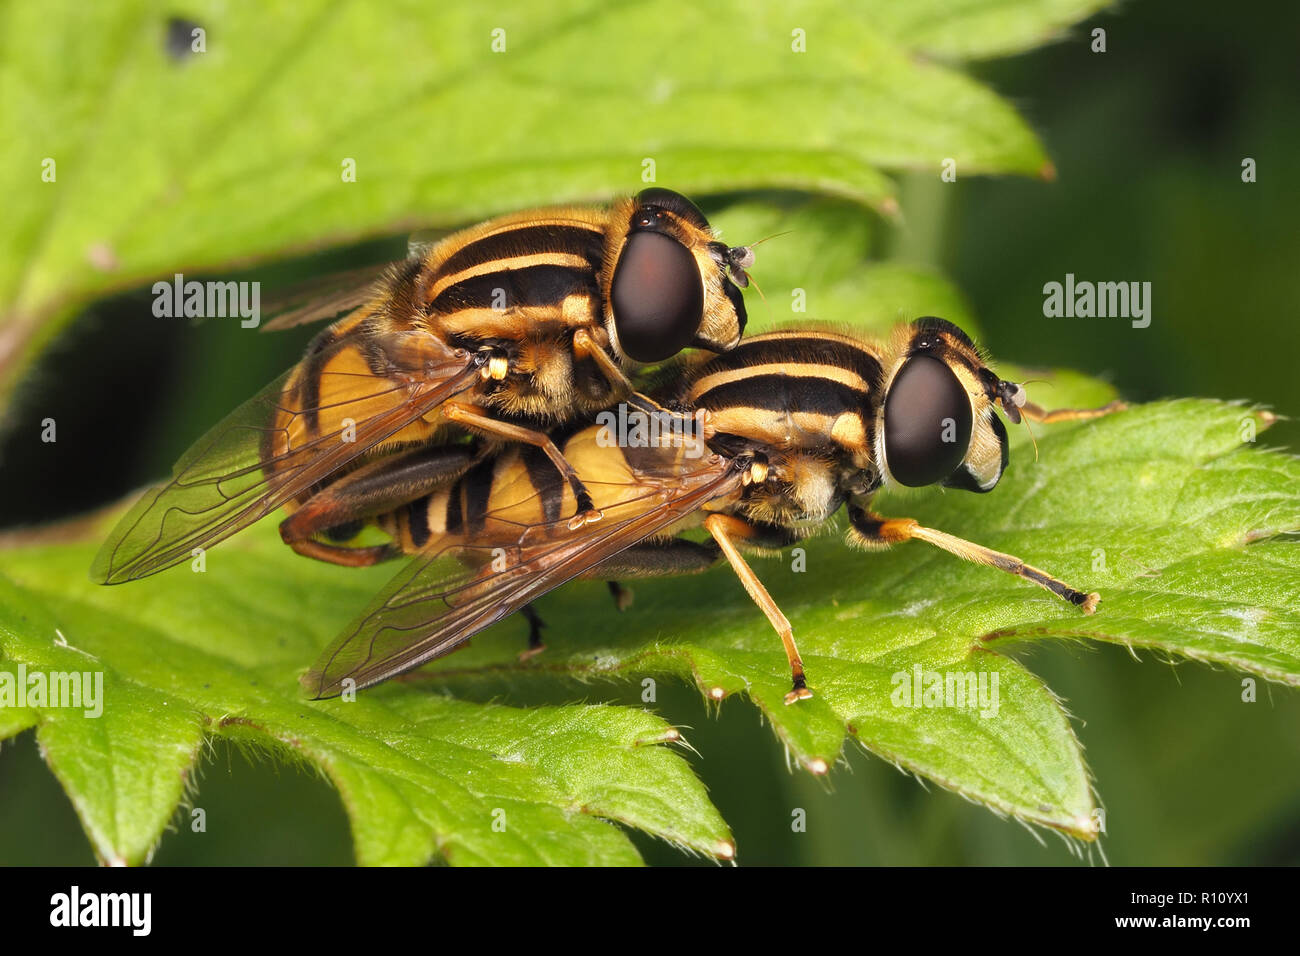 Mating Hoverflies (Helophilus pendulus) on creeping buttercup plant. Tipperary, Ireland Stock Photo